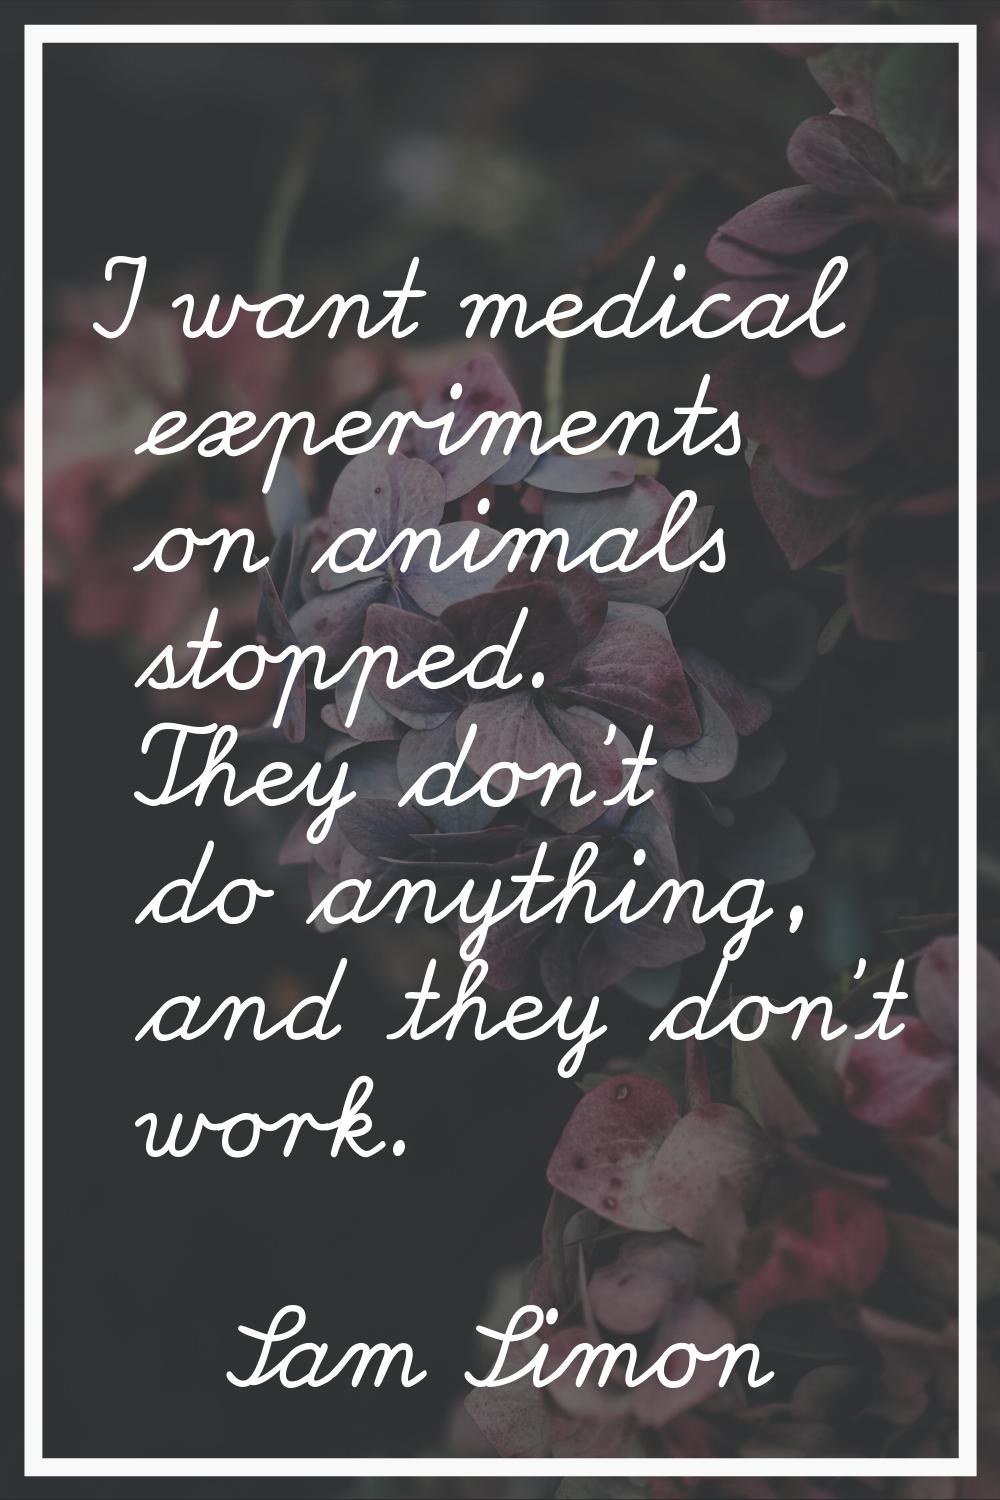 I want medical experiments on animals stopped. They don't do anything, and they don't work.